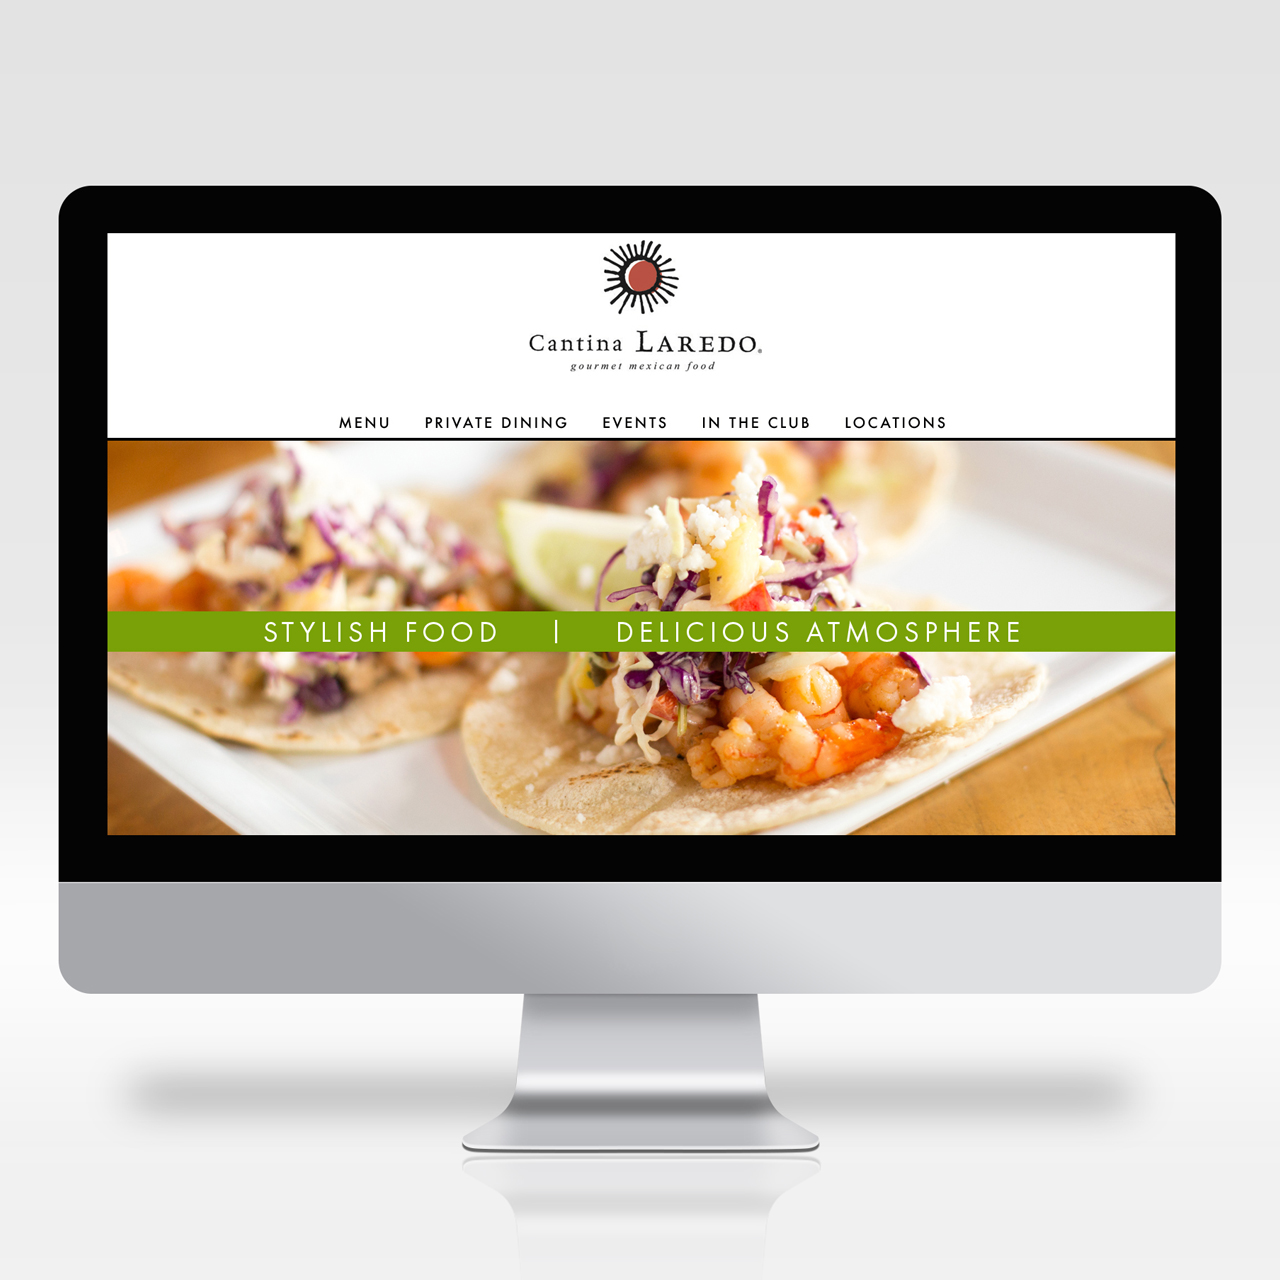 An image of a computer with the home page design for Cantina Laredo's website